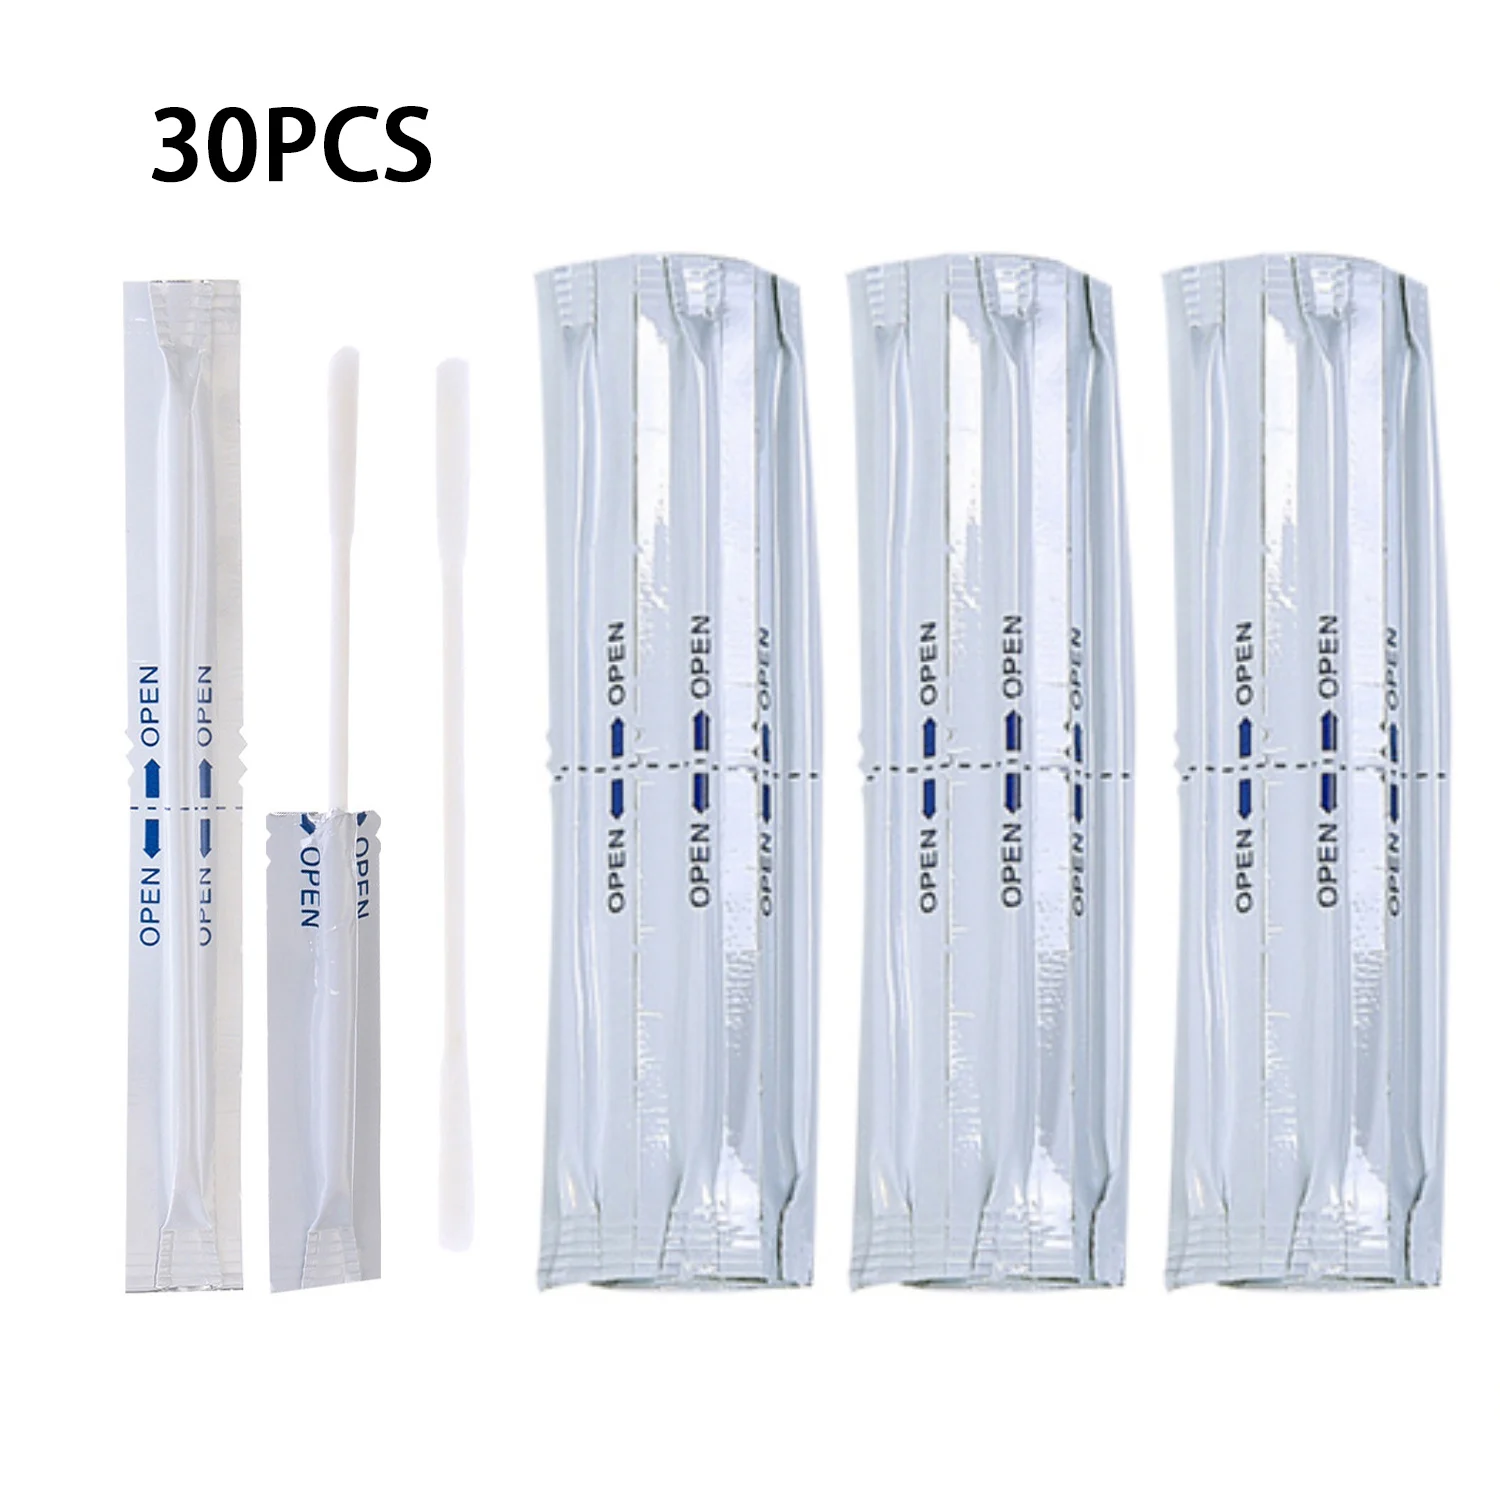 30 Pcs/Lot Wet Cotton Swabs Double Head Cleaning Stick For IQOS 3 DUO For IQOS 2.4 PLUS 3duo 3.0 LIL/LTN/HEETS/GLO Heater HOT